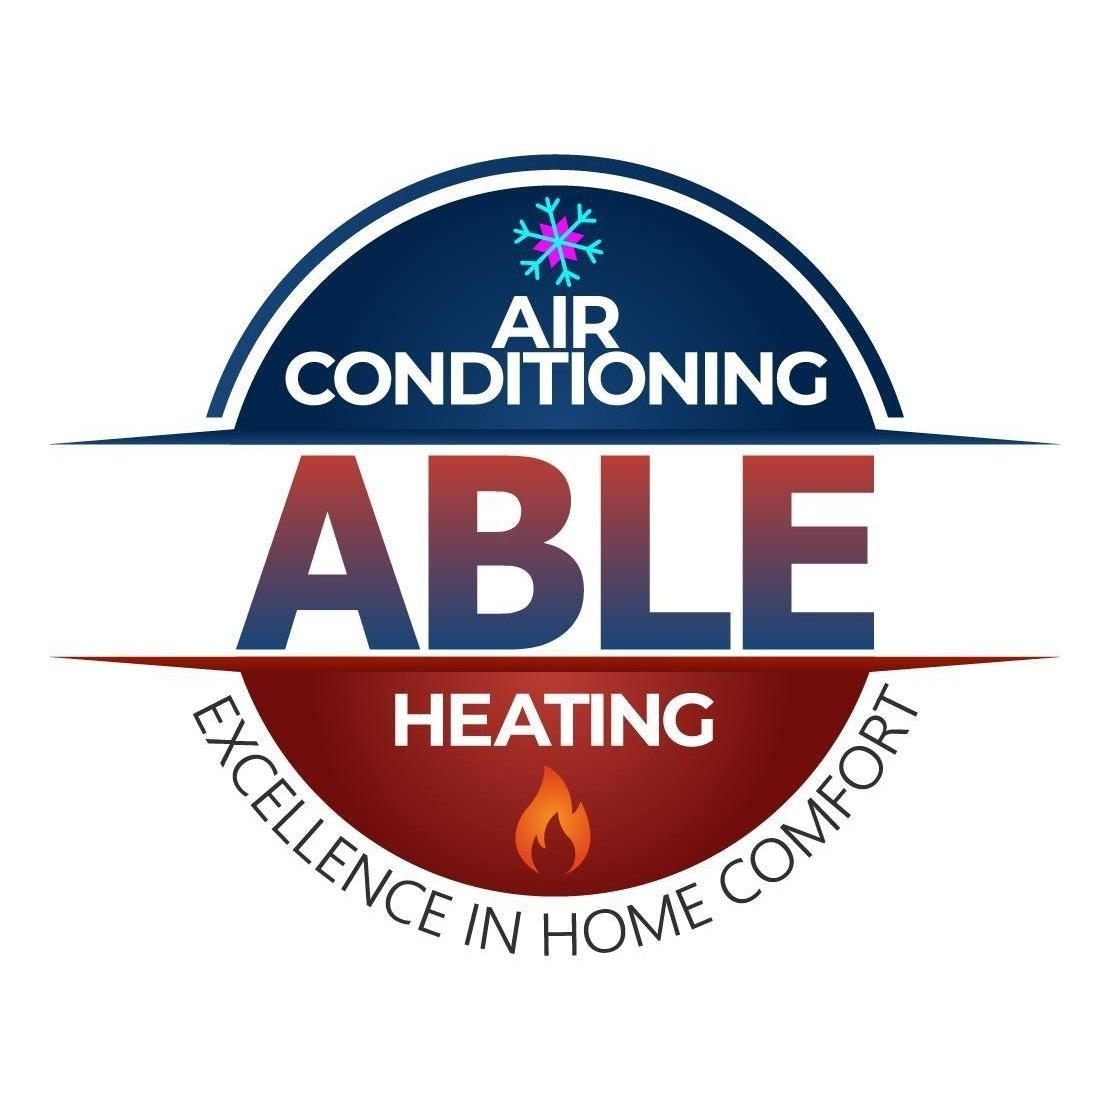 Able Air Conditioning & Heating - Furnaces